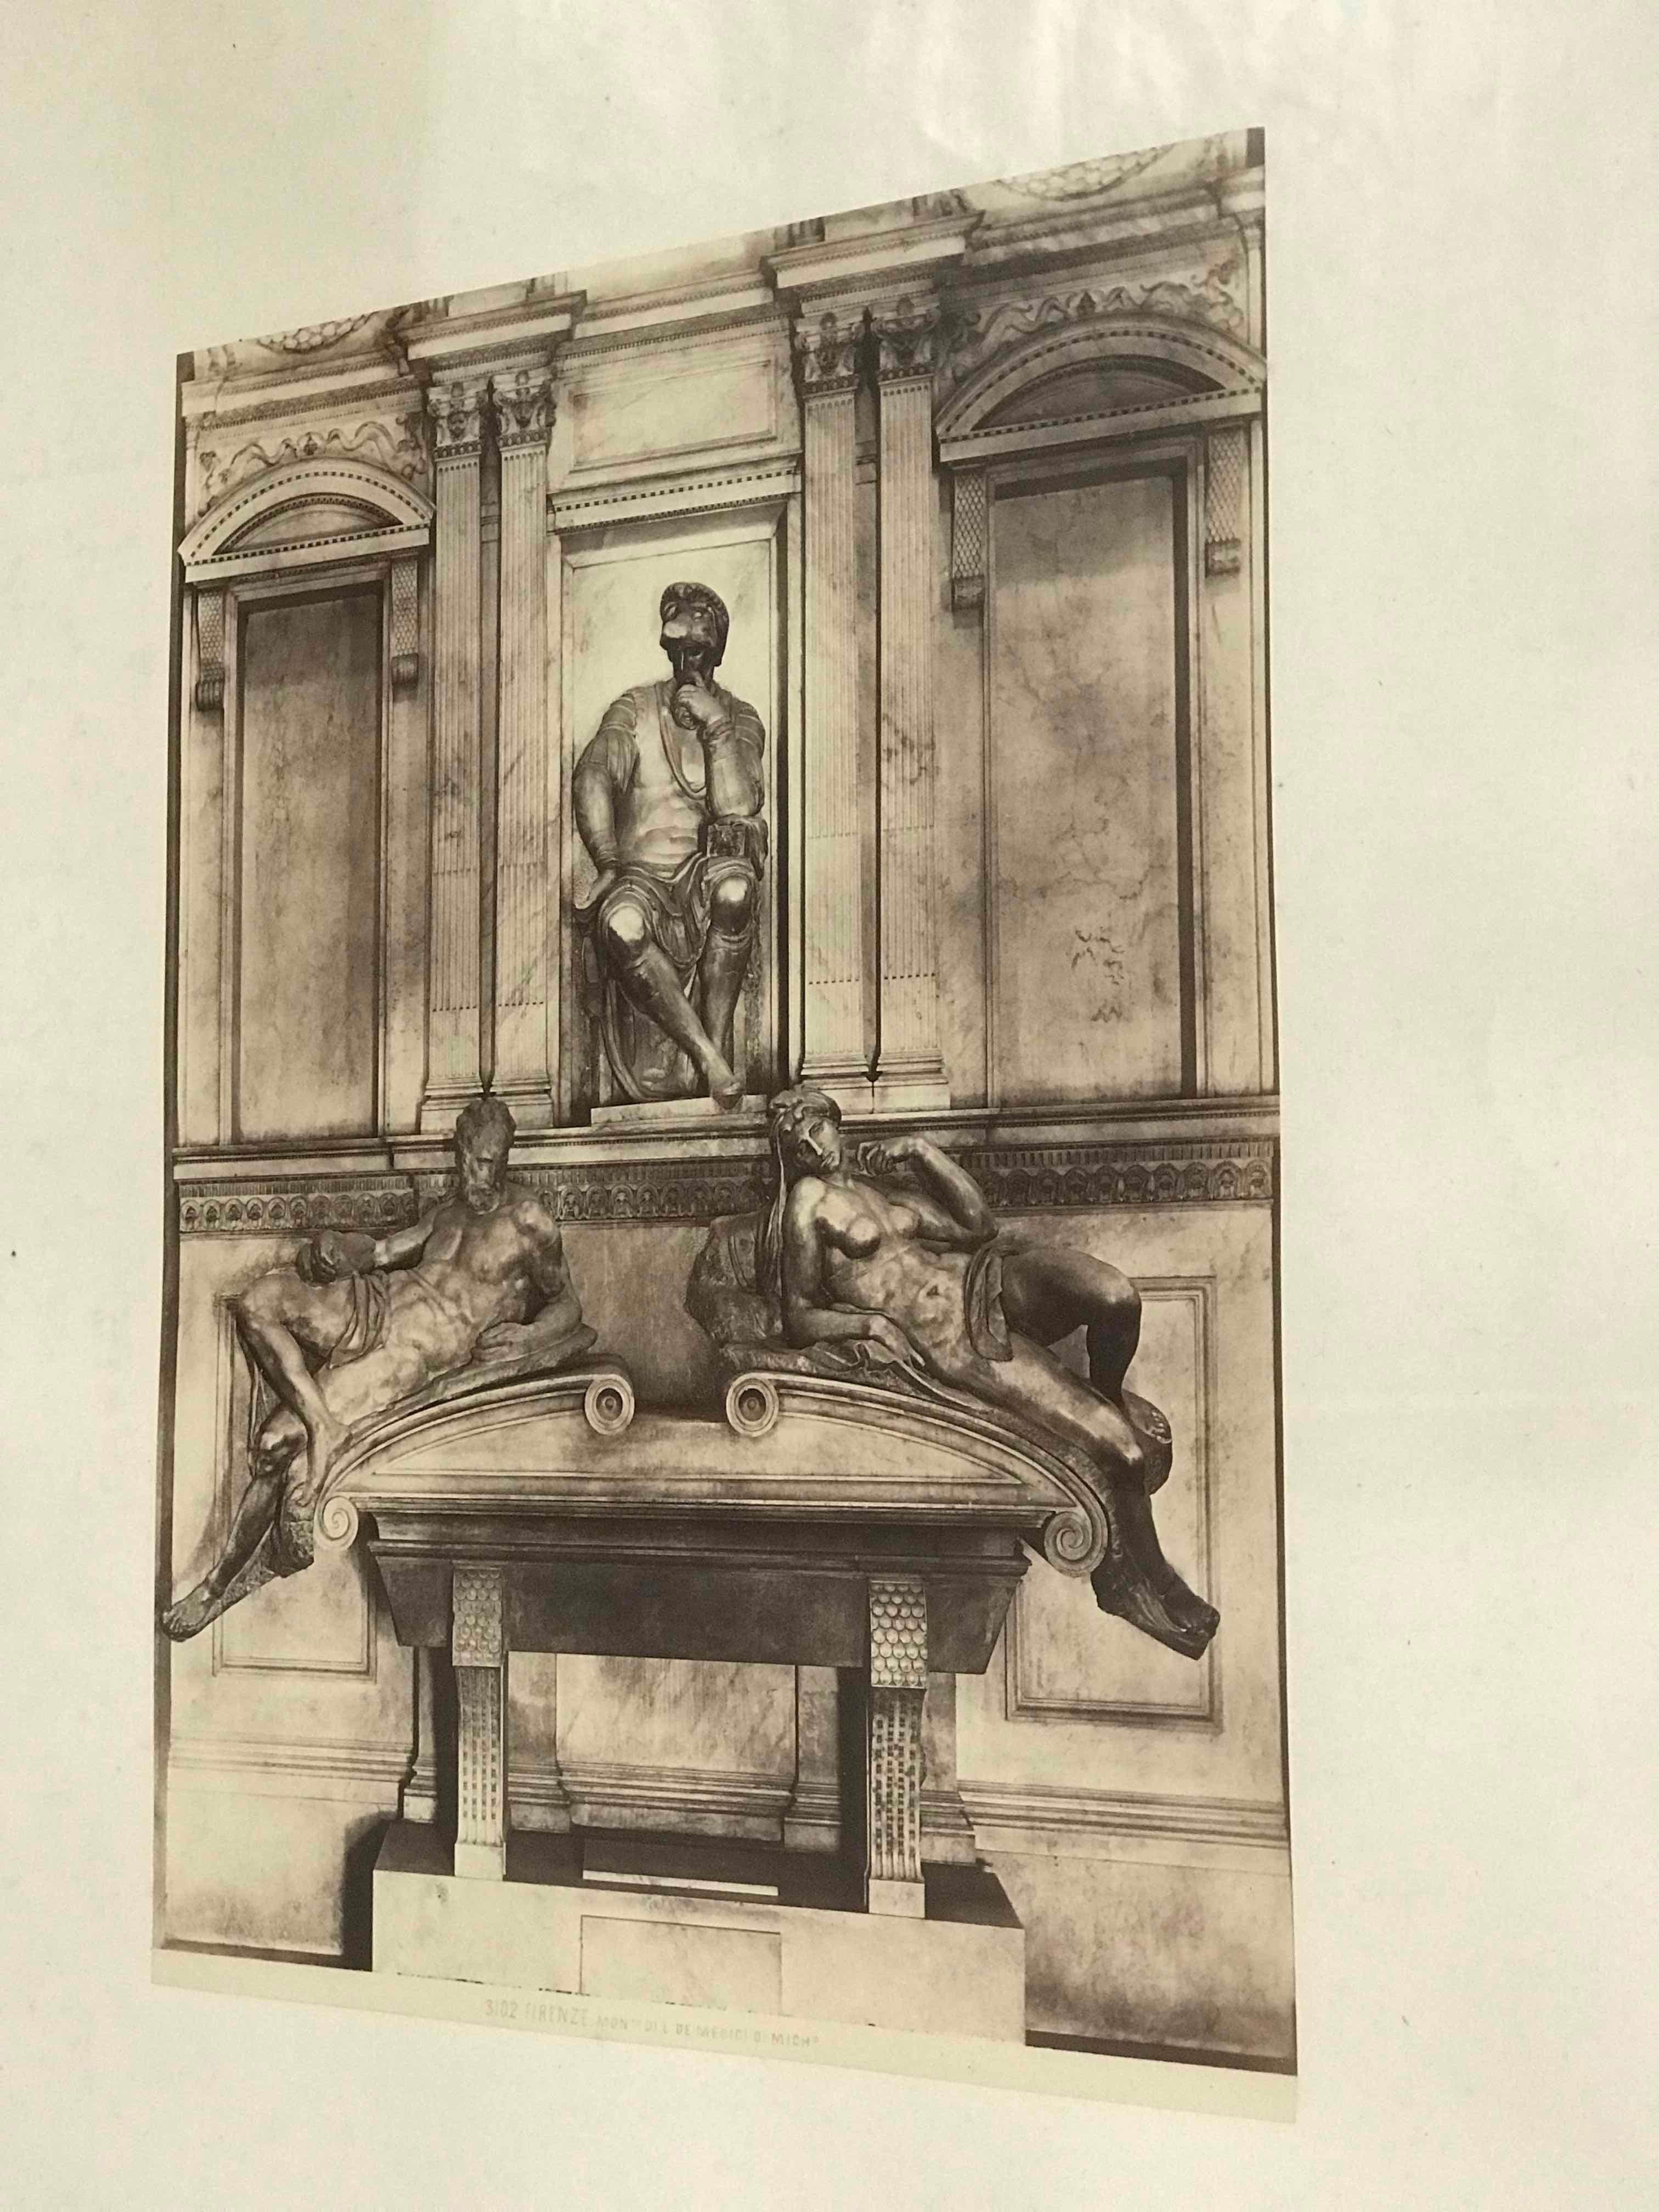 Early 20th-century black-and-white photograph of Italian architectural details from England. Mounted in a simple, softly beveled black frame, the image gives off a faint, sepia-toned glow. At the center of the image, a seated sculpture of a Roman